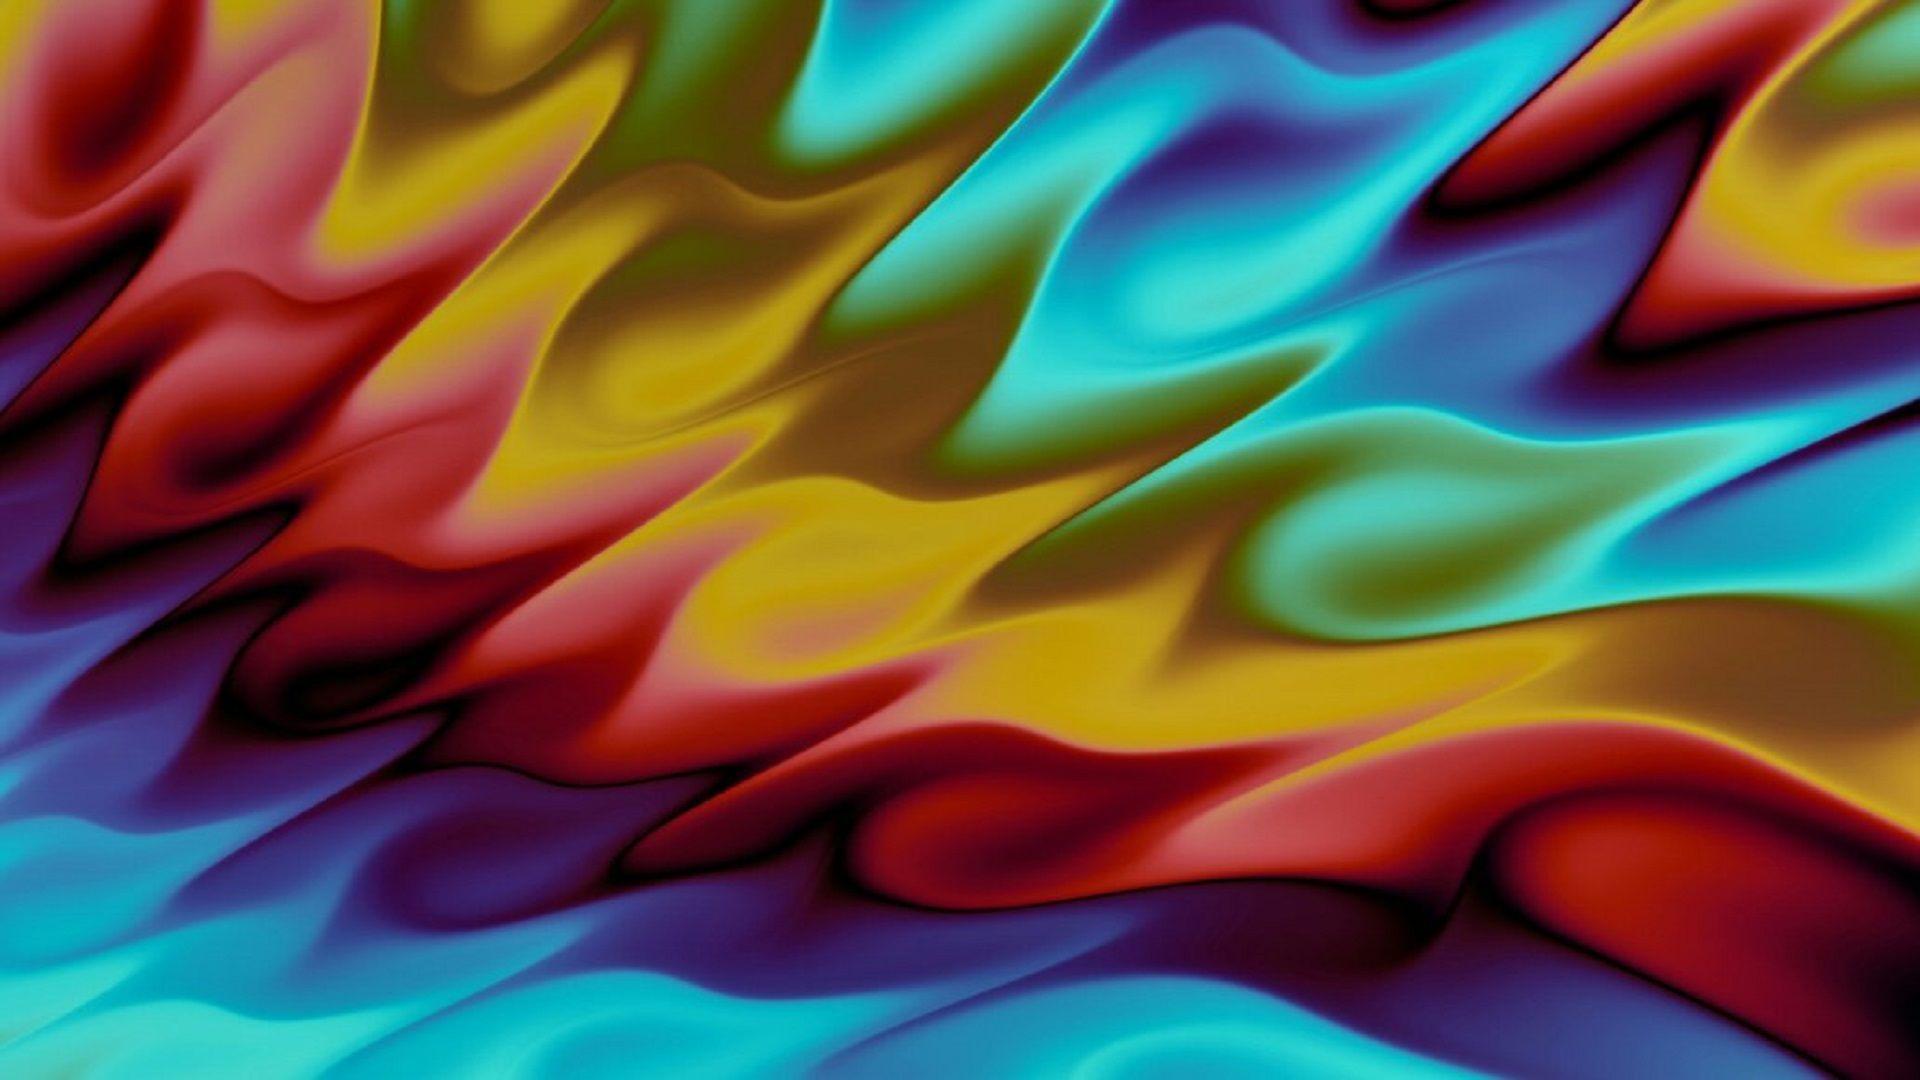 Psychedelic waves Wallpaper. High Quality Wallpaper